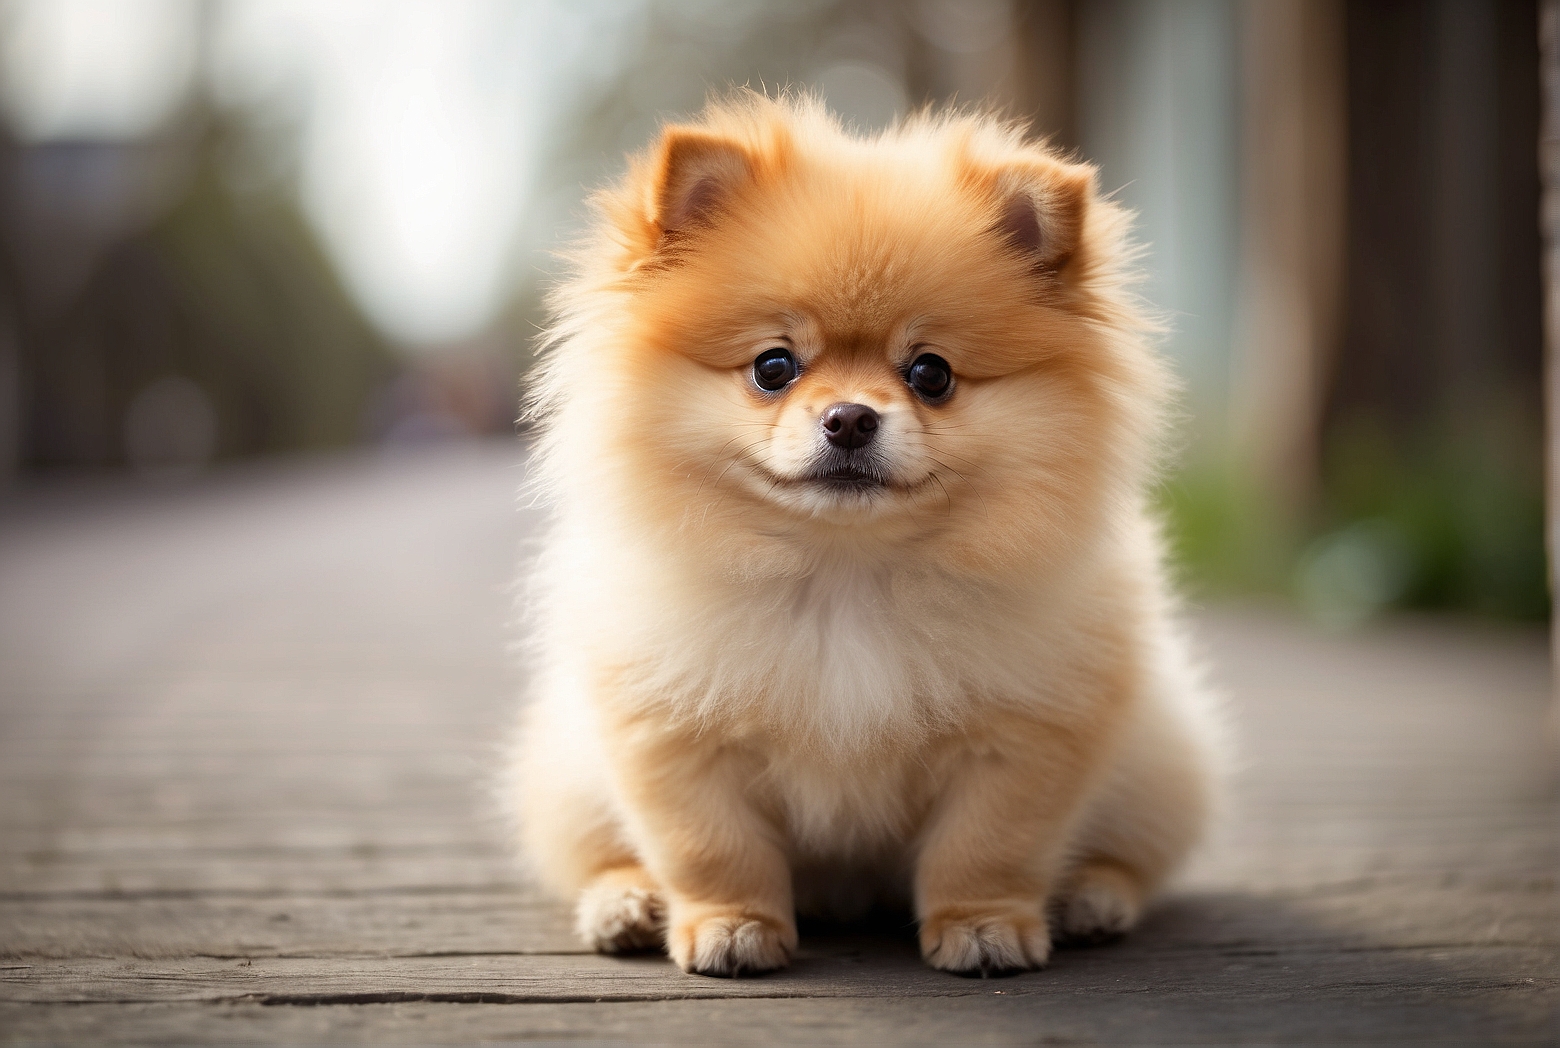 Tips for First-Time Pomeranian Owners